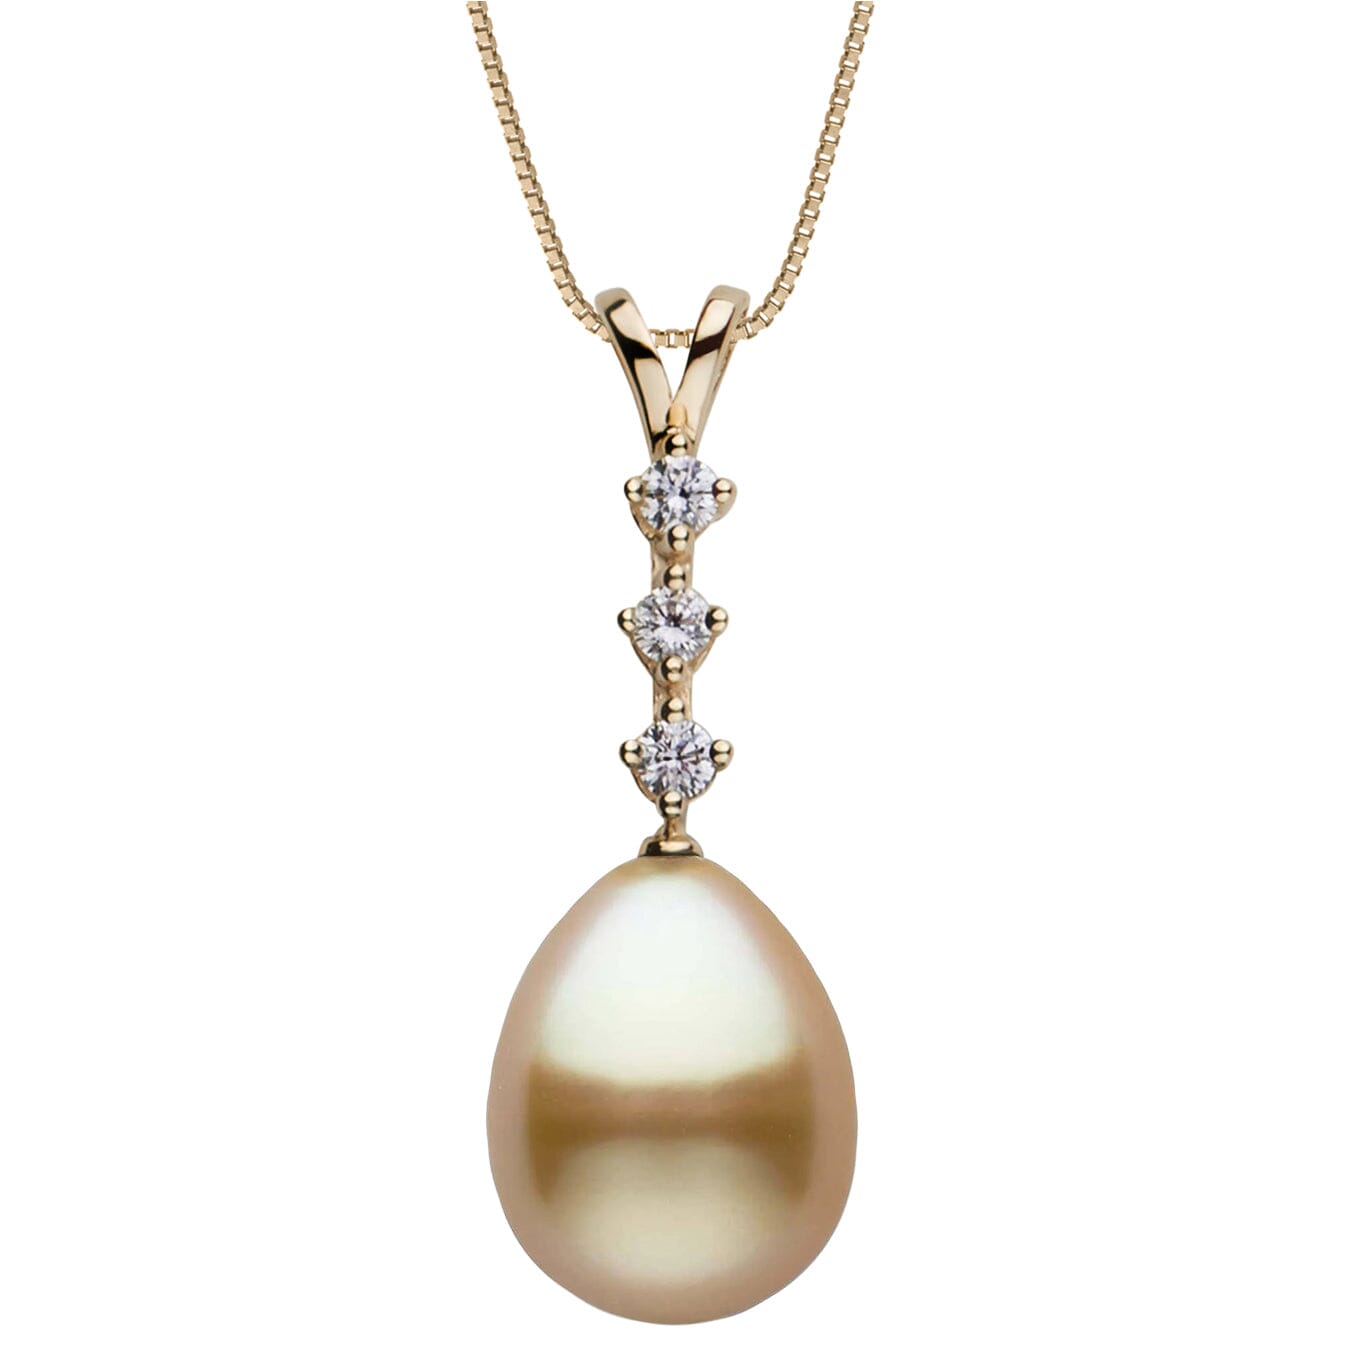 10.0-11.0 mm Golden South Sea Drop Pearl and Diamond Luminary Pendant Yellow Gold